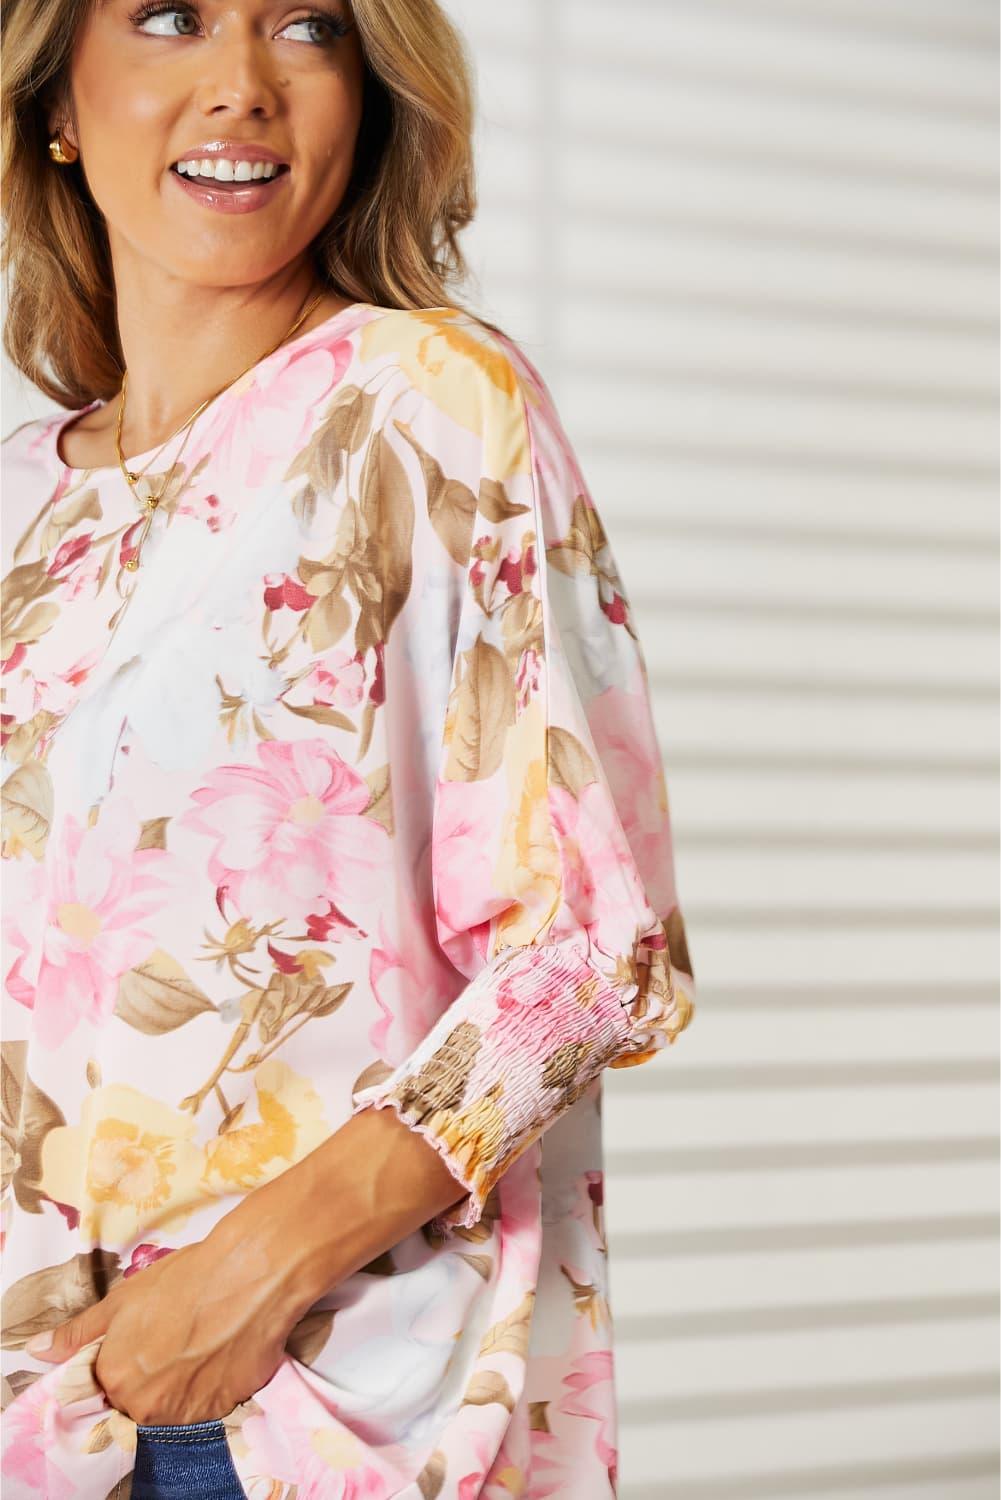 Double Take Floral Round Neck Three-Quarter Sleeve Top - Lab Fashion, Home & Health